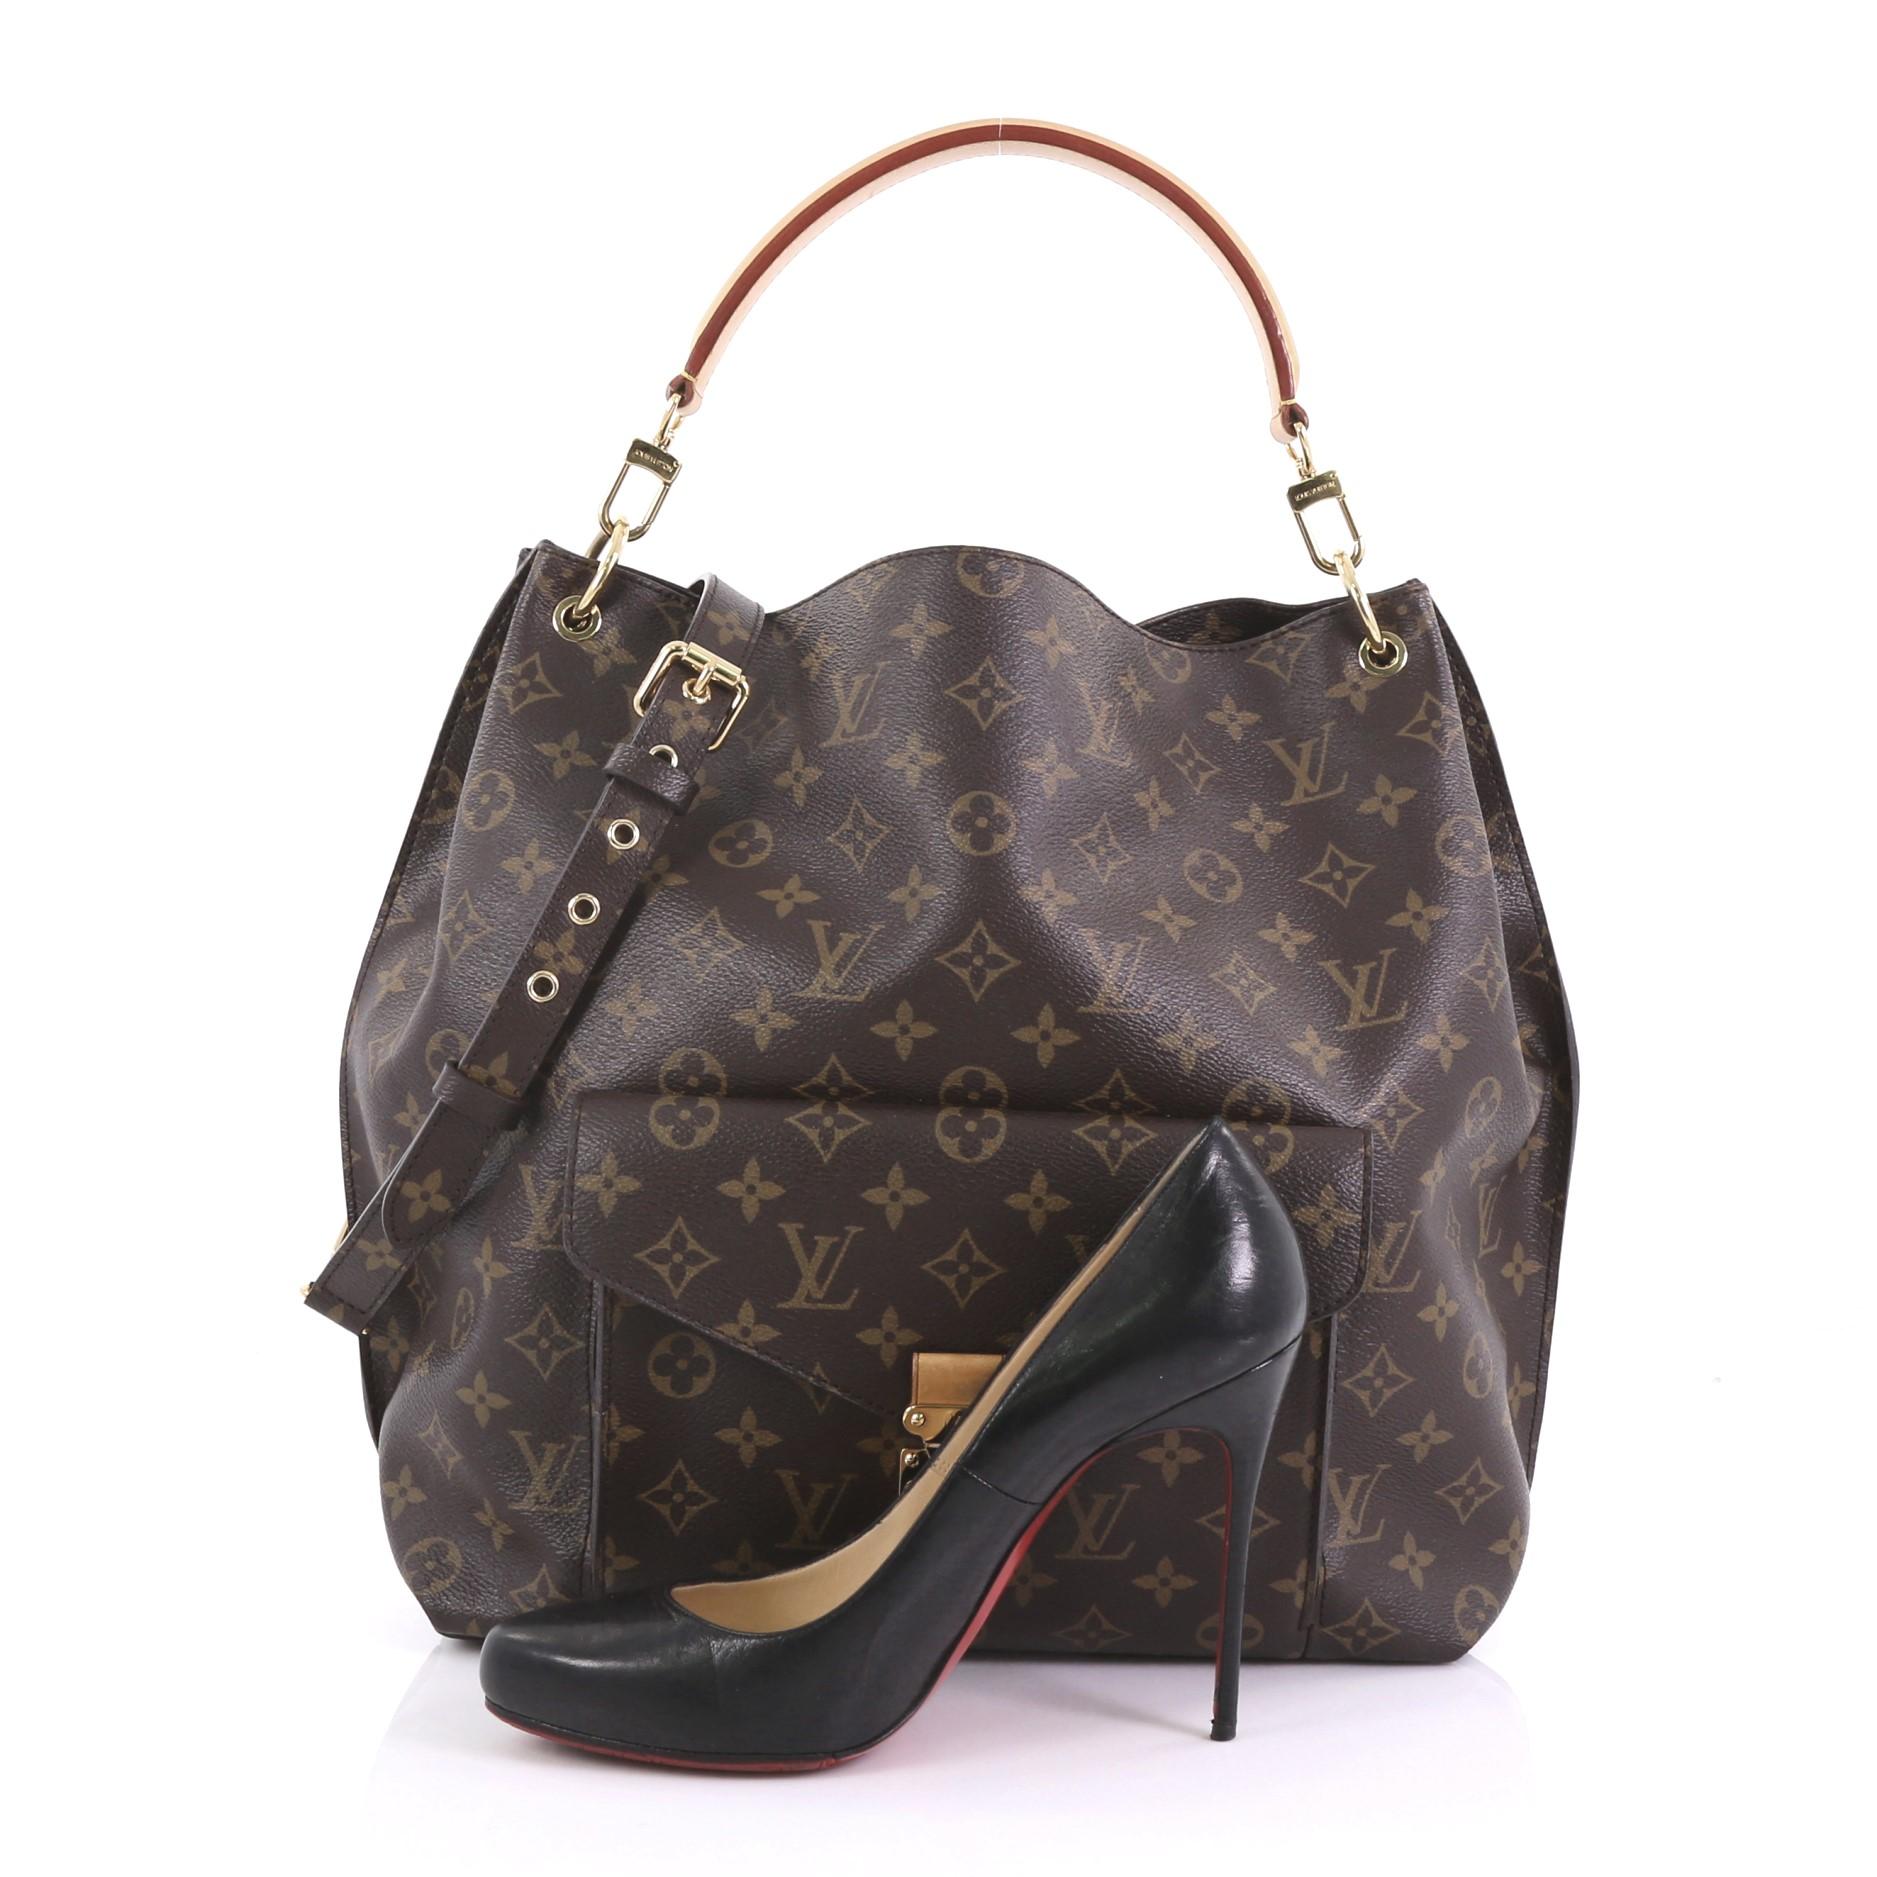 This Louis Vuitton Metis Hobo Monogram Canvas, crafted in brown monogram coated canvas, features front flap pocket with S-lock closure, removable vachetta leather handle, and gold-tone hardware. Its wide top opening showcases a brown microfiber